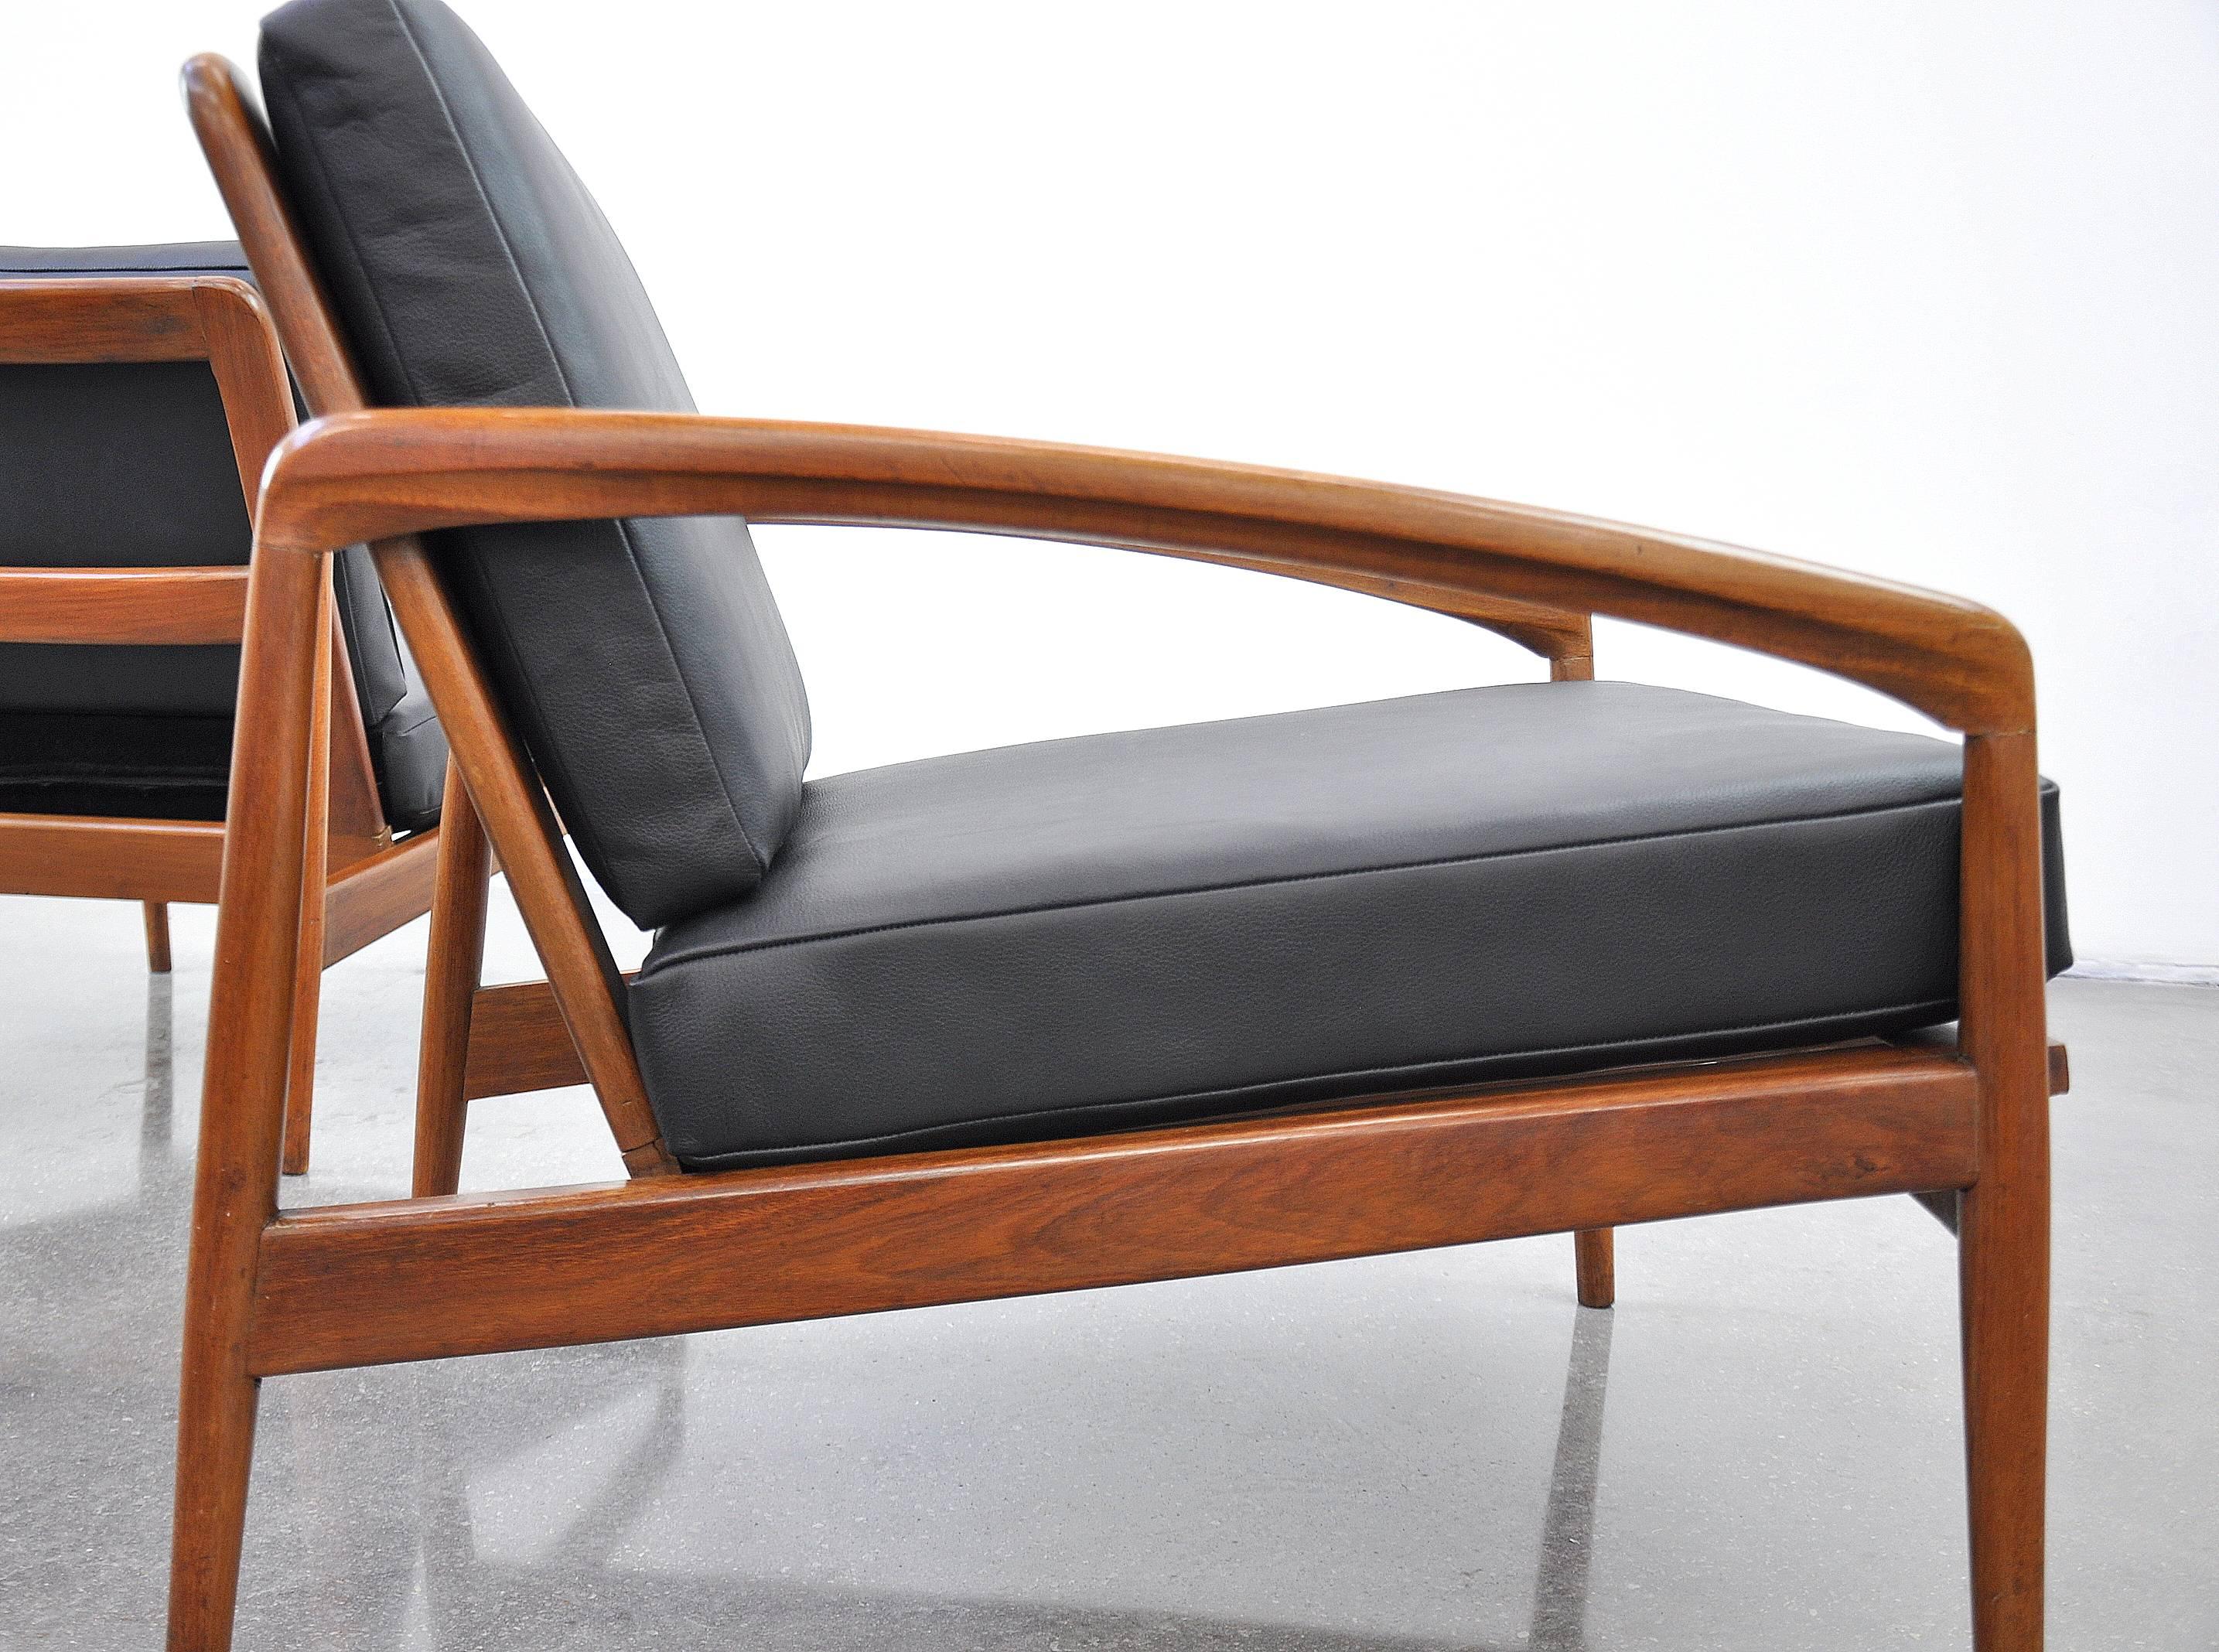 Pair of Danish Modern Black Leather and Teak Lounge Chairs 1